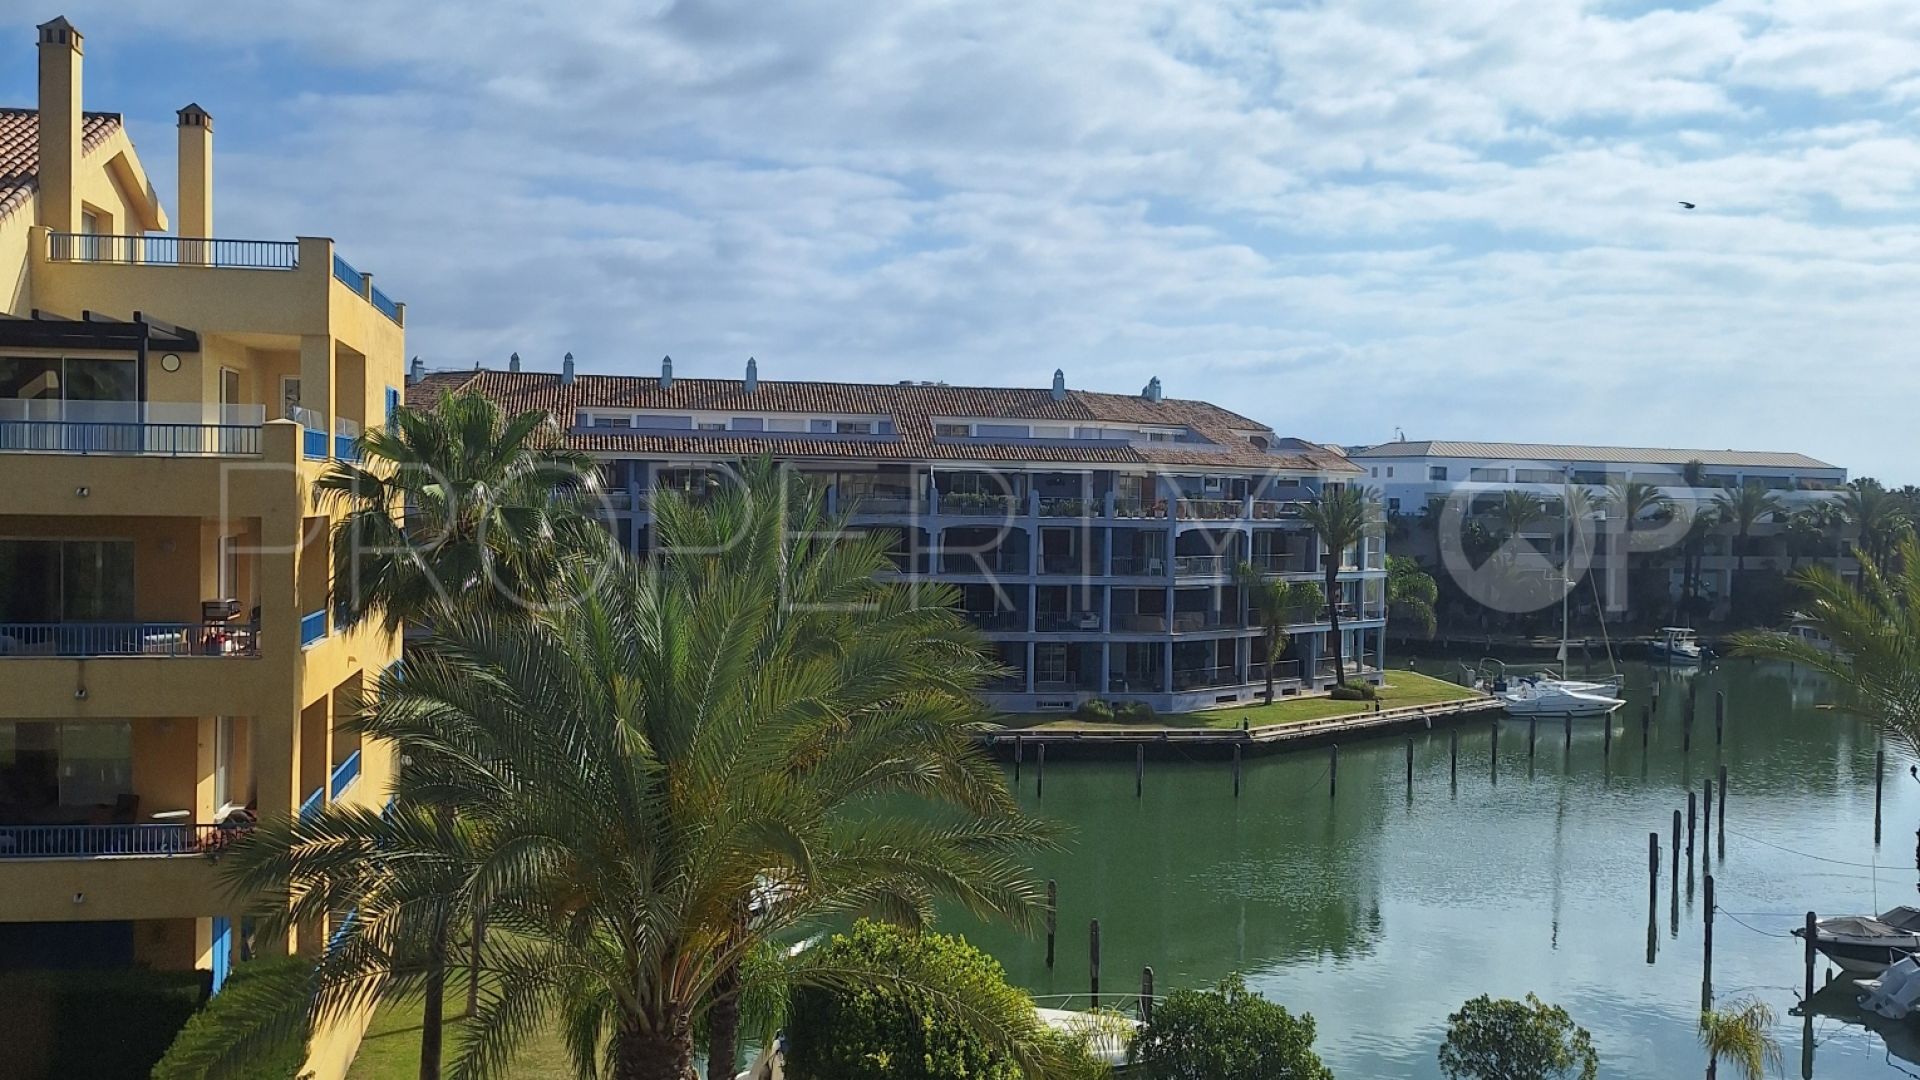 Apartment with 3 bedrooms for sale in Ribera del Paraiso